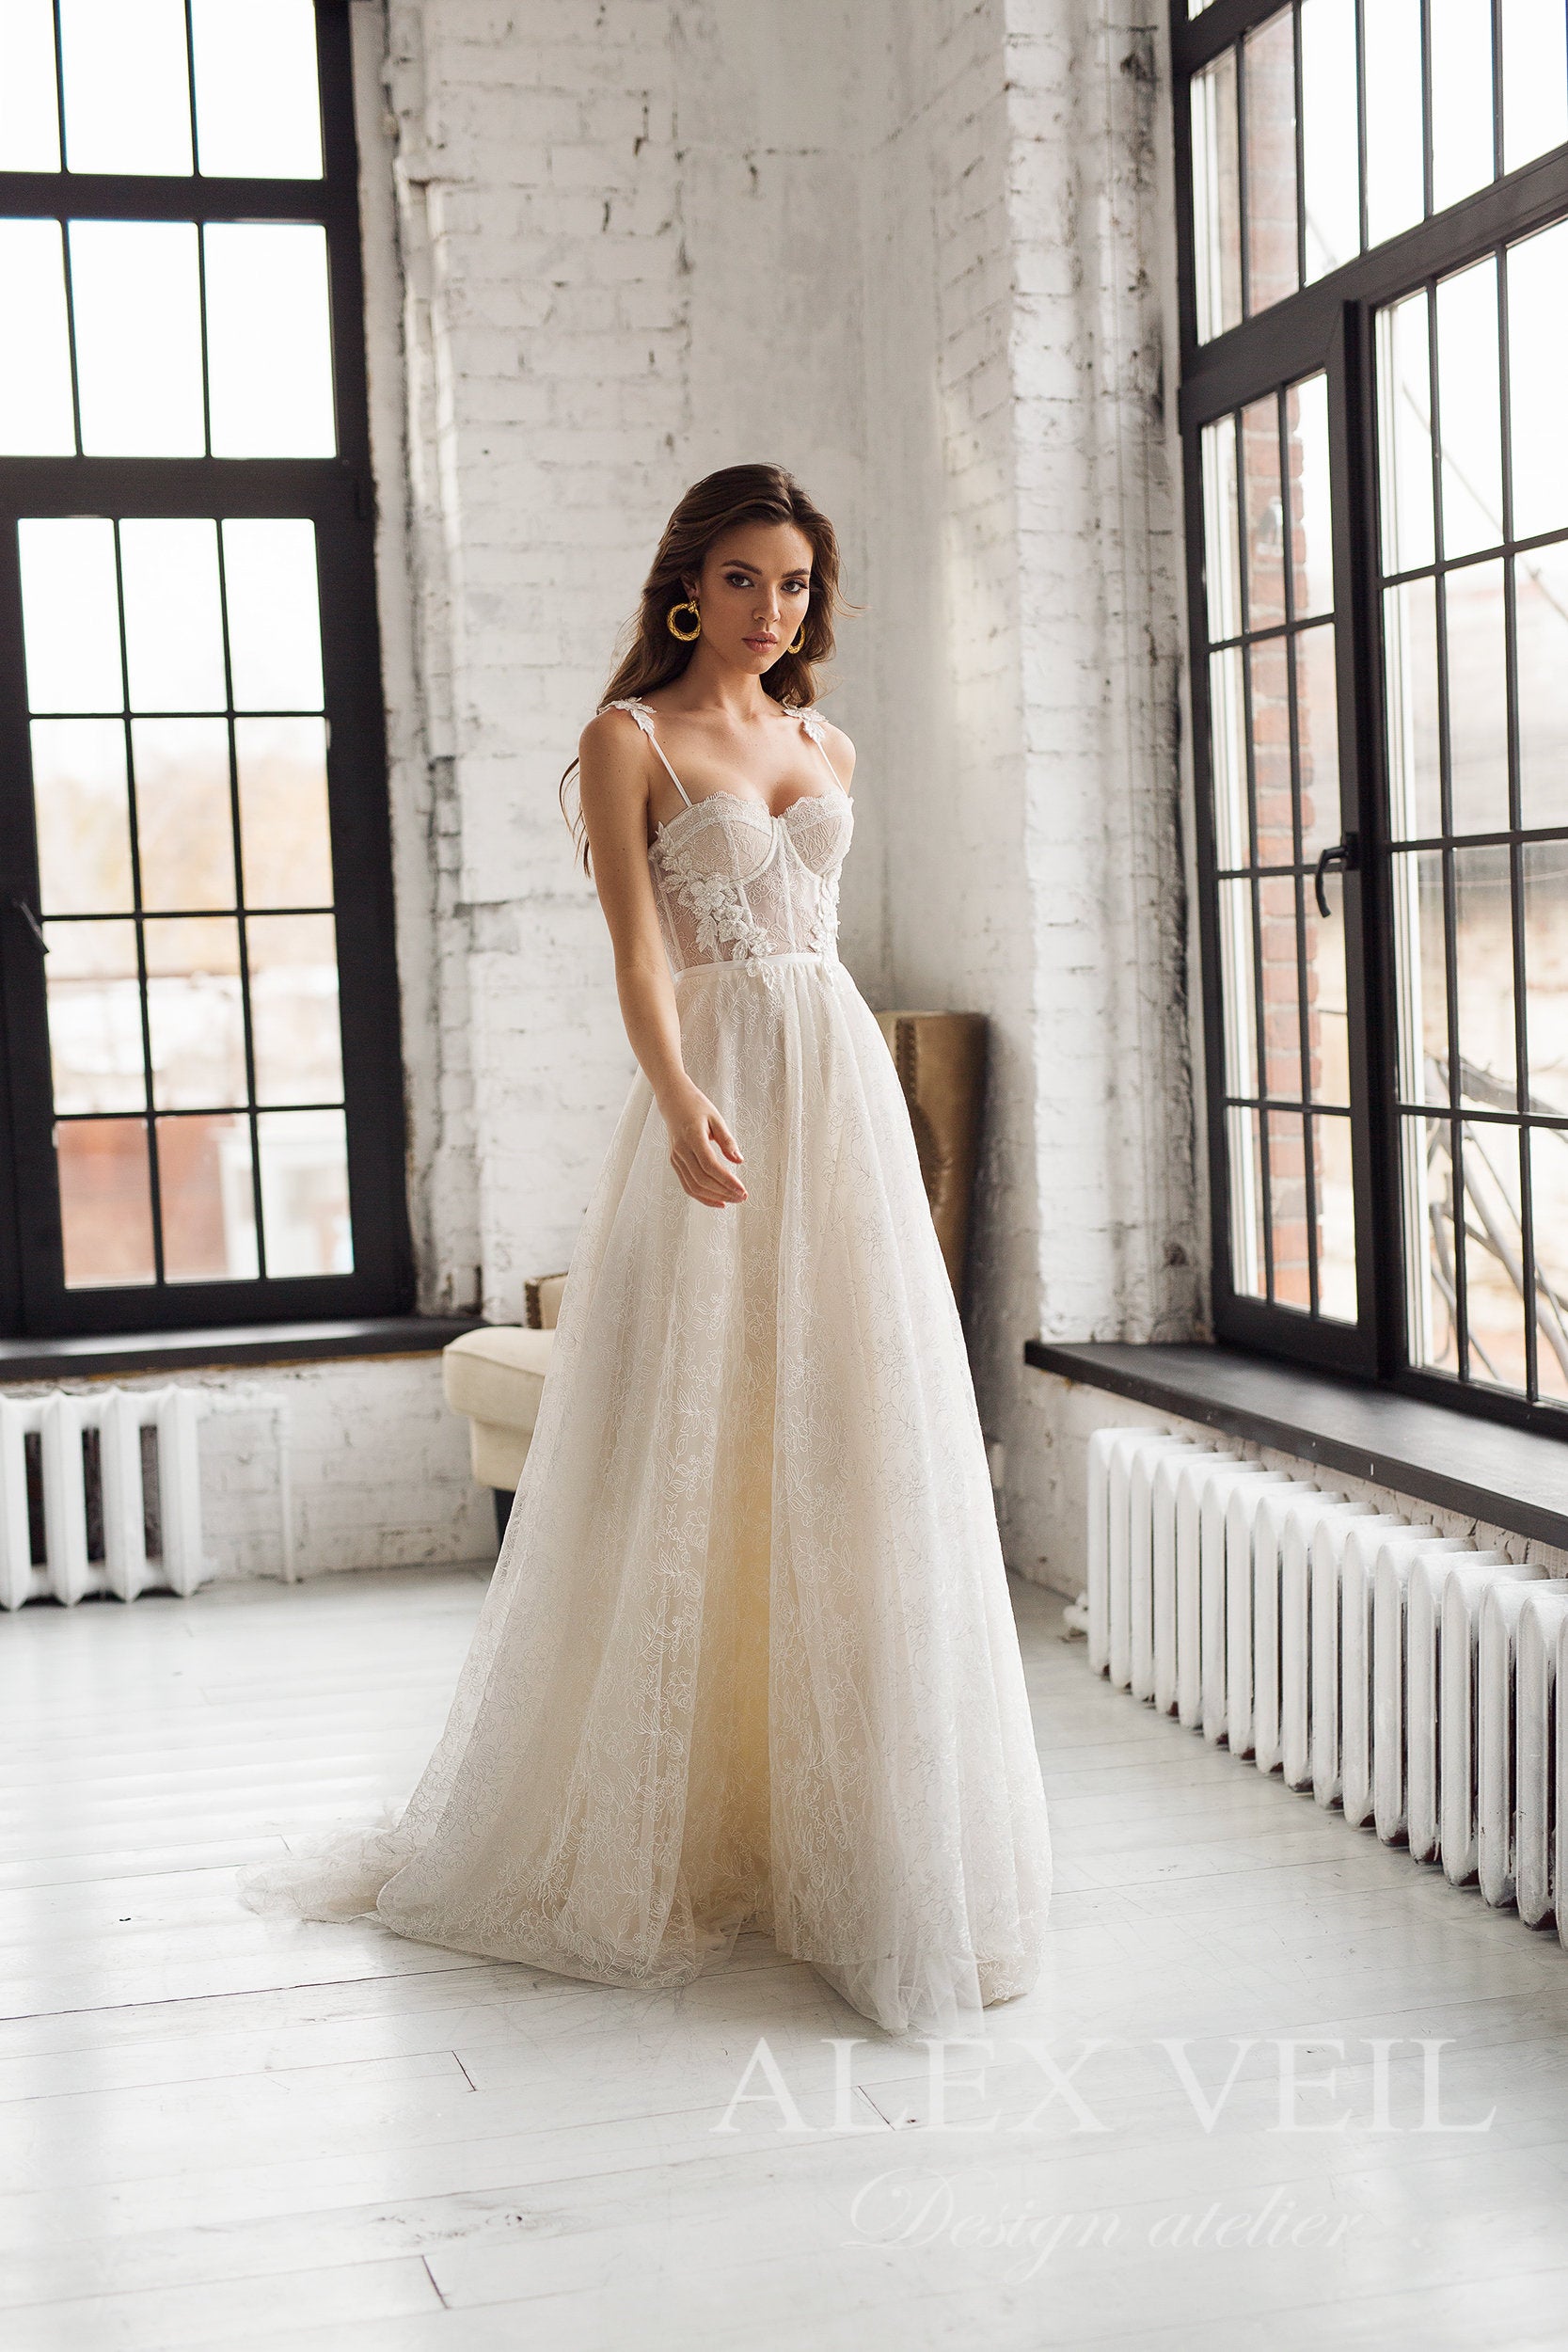 Where To Find A Bridal Gown Under $1,000 or Less